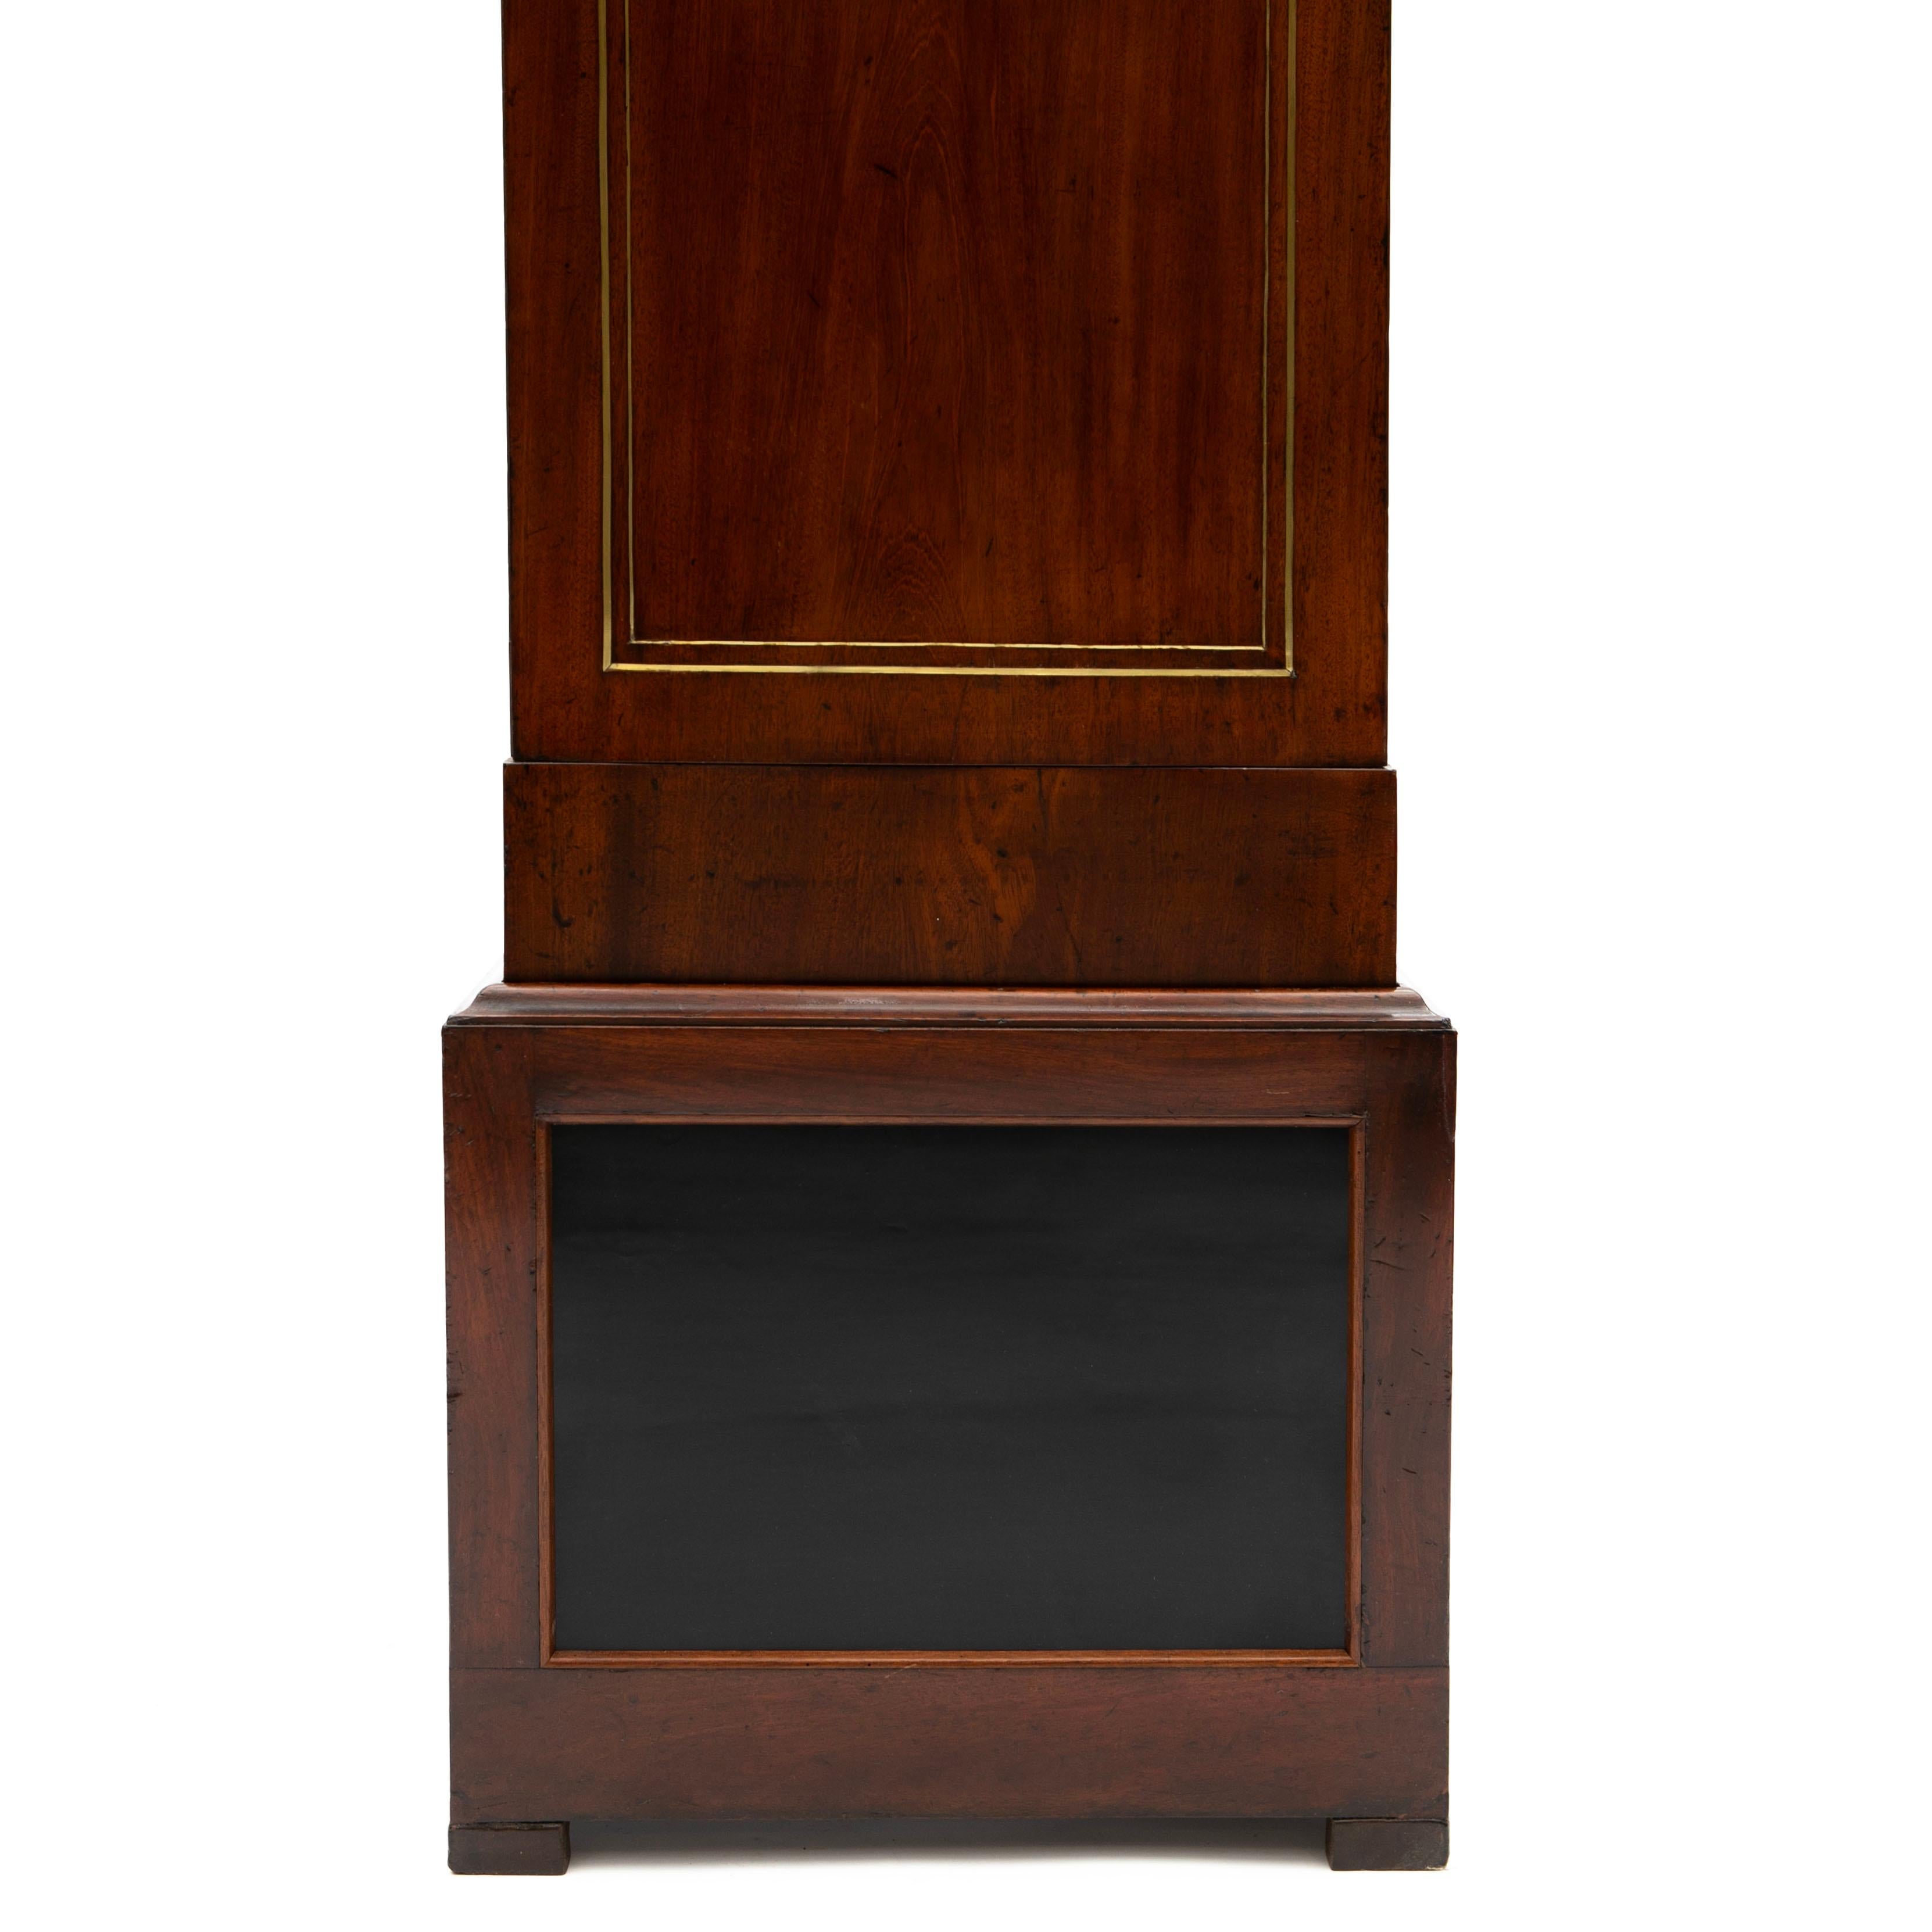 Elegant Early 19th Century Empire Mahogany Pedestal Cabinet For Sale 1